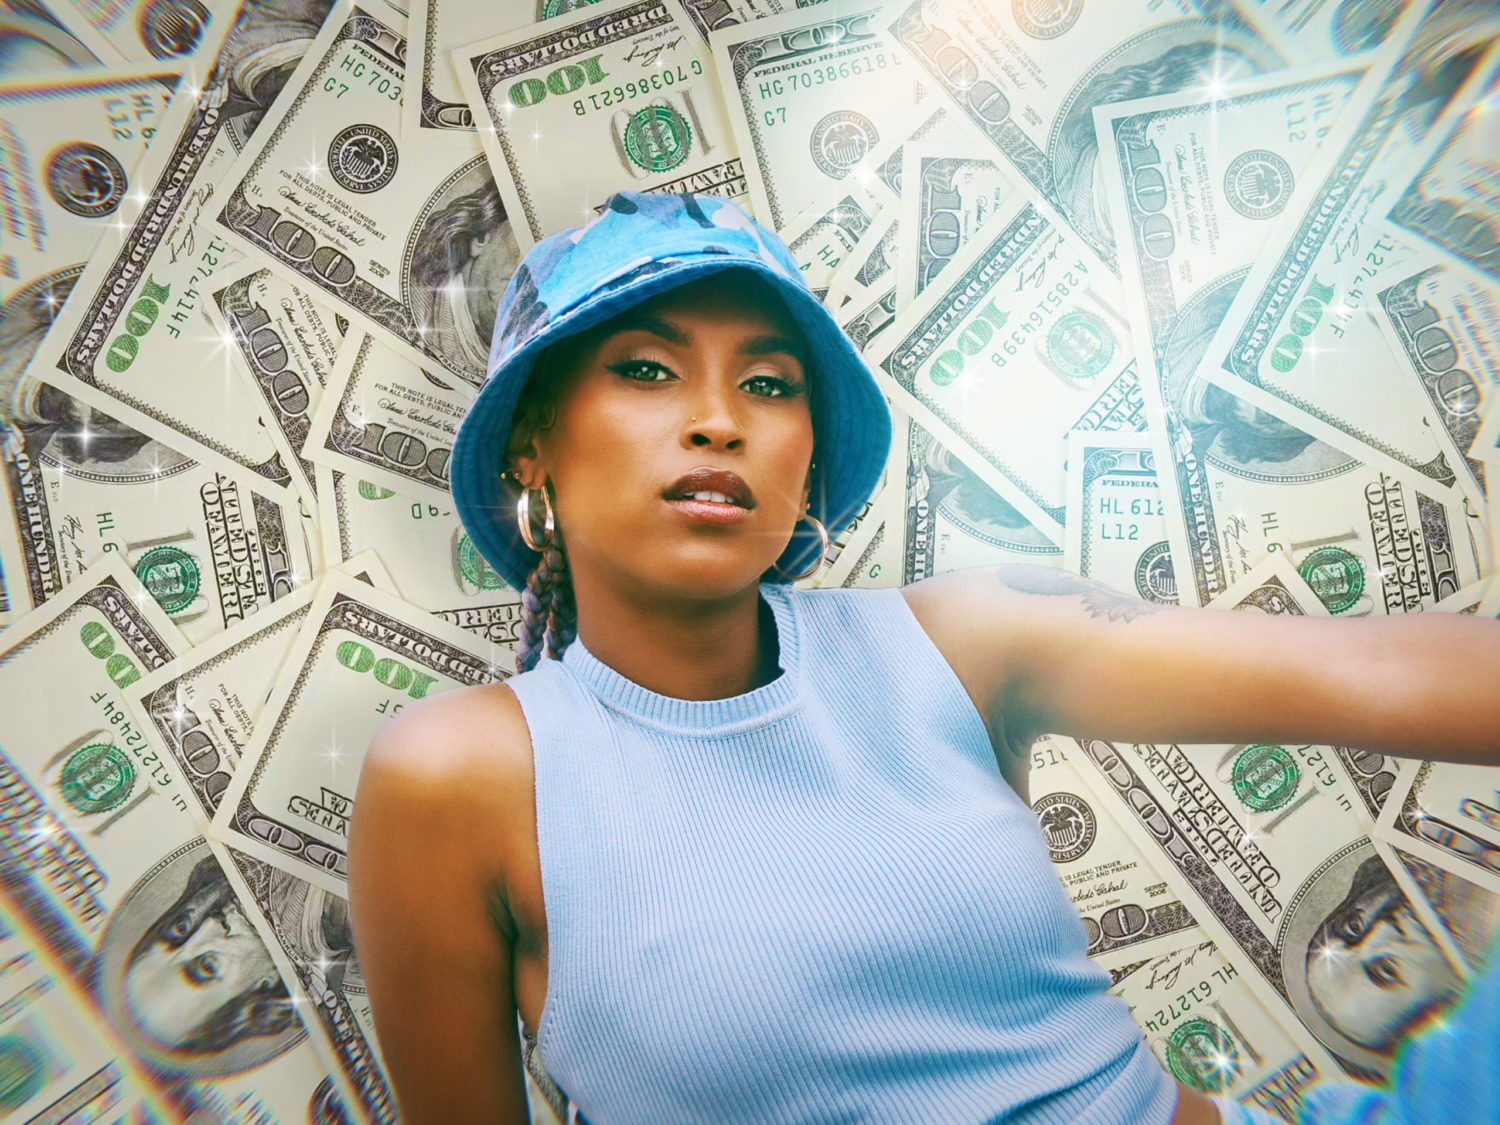 How to Add Cash Money Background to Your Selfie Photos